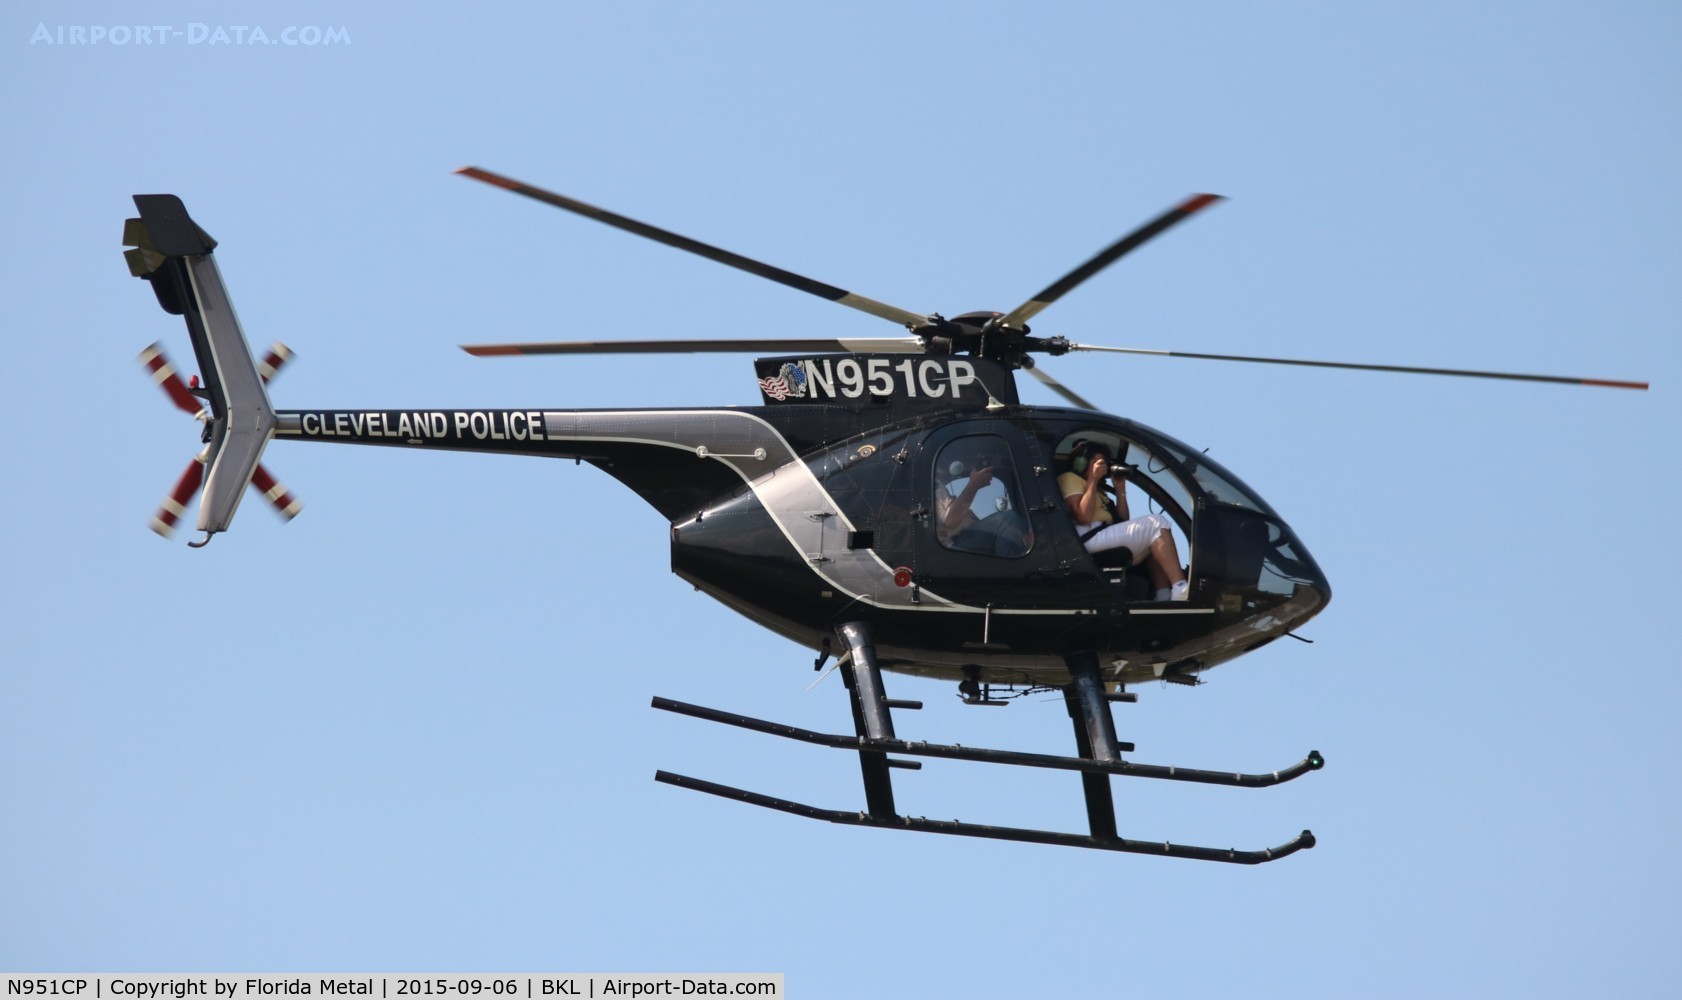 N951CP, 2000 MD Helicopters 369E C/N 0549E, Cleveland Police